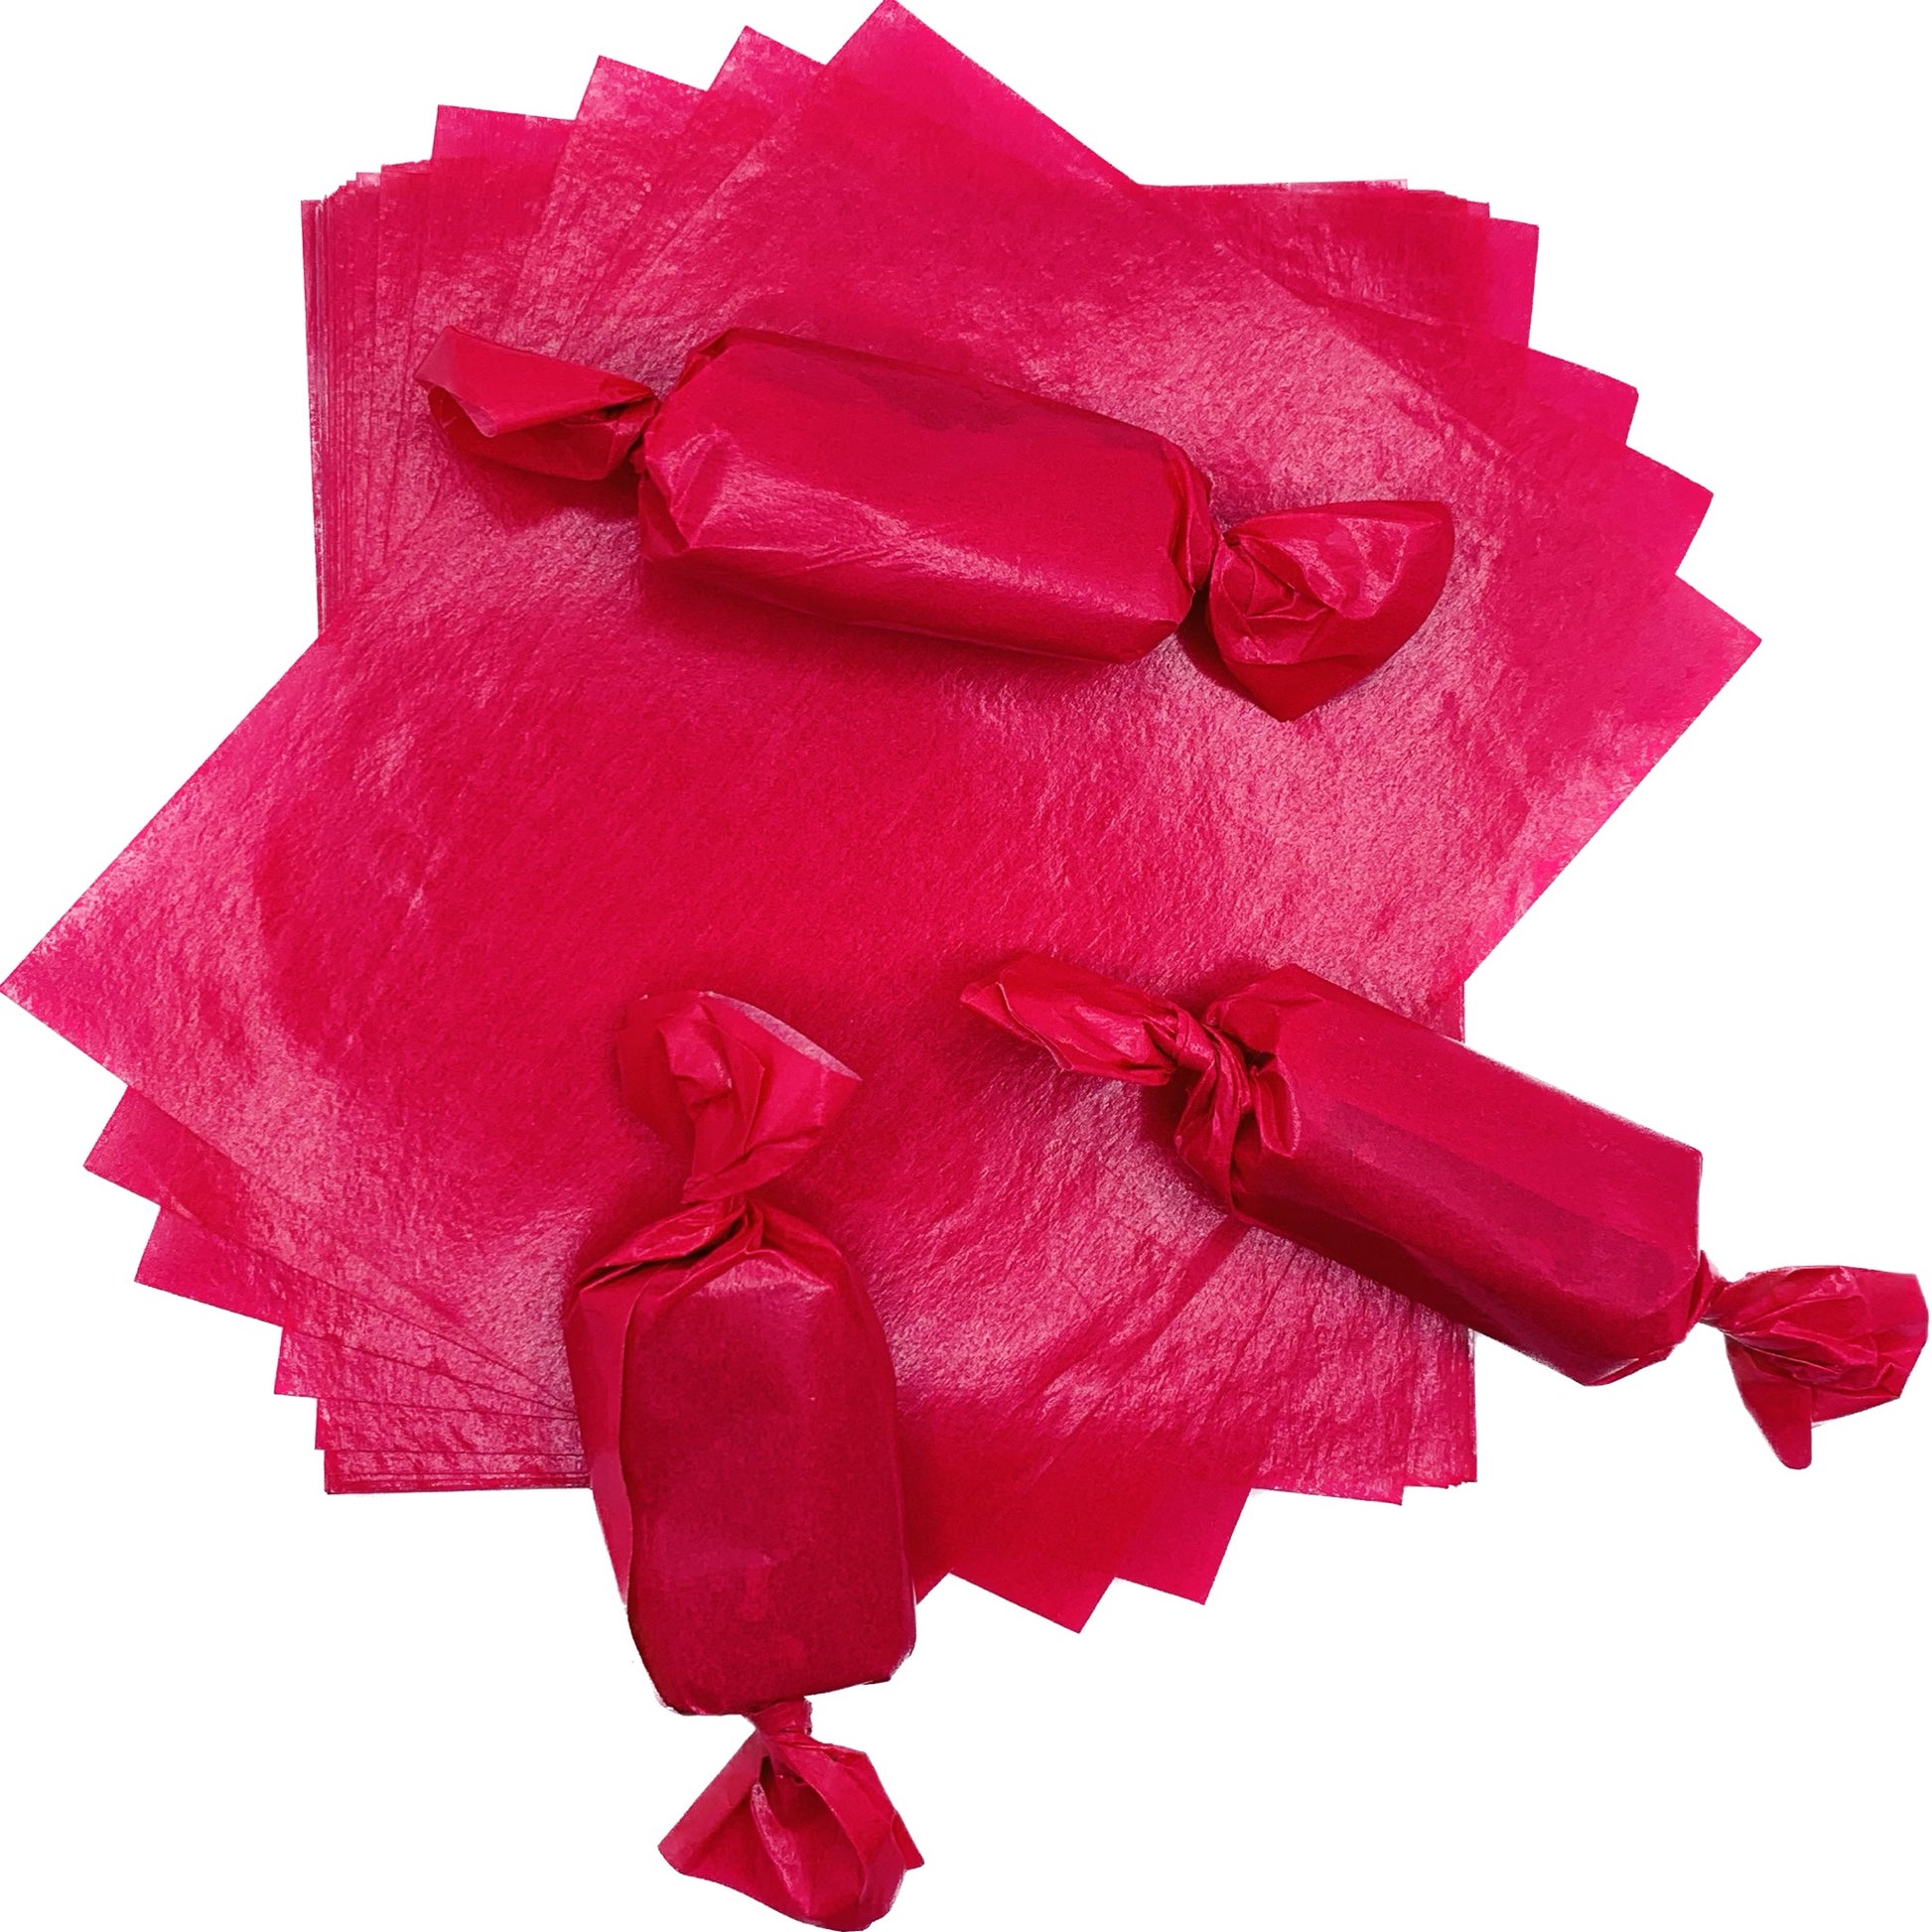 Pink Caramel Candy Wrappers with 3 pieces of wrapped candy